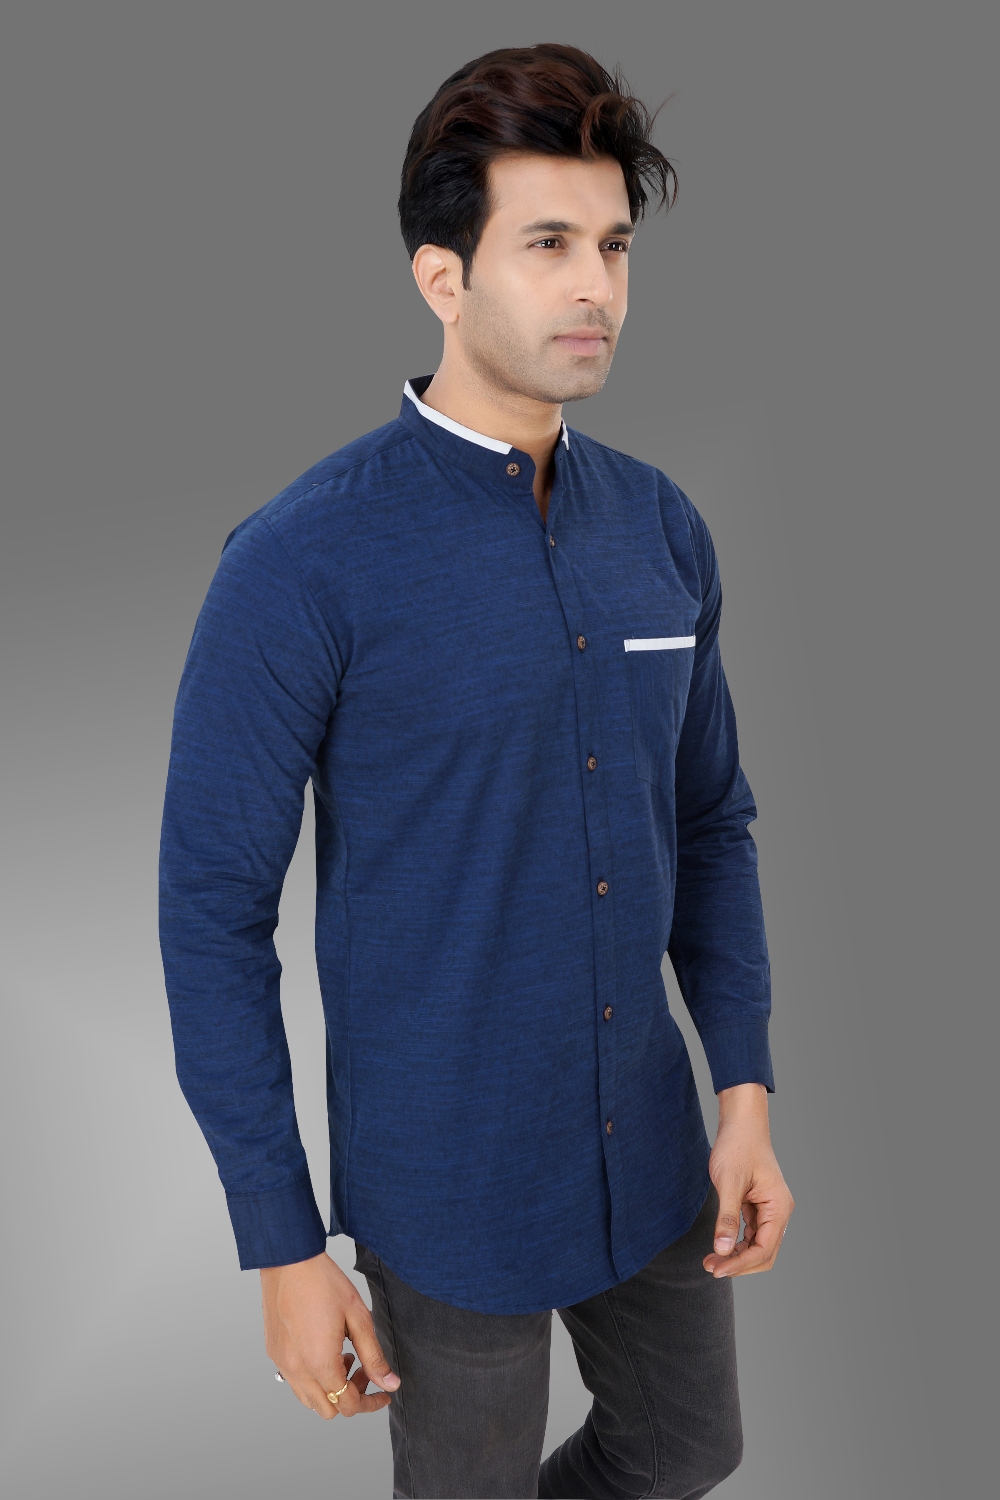 Buy Kandy Royal Blue Casual Shirt For Men's Online @ ₹439 from ShopClues